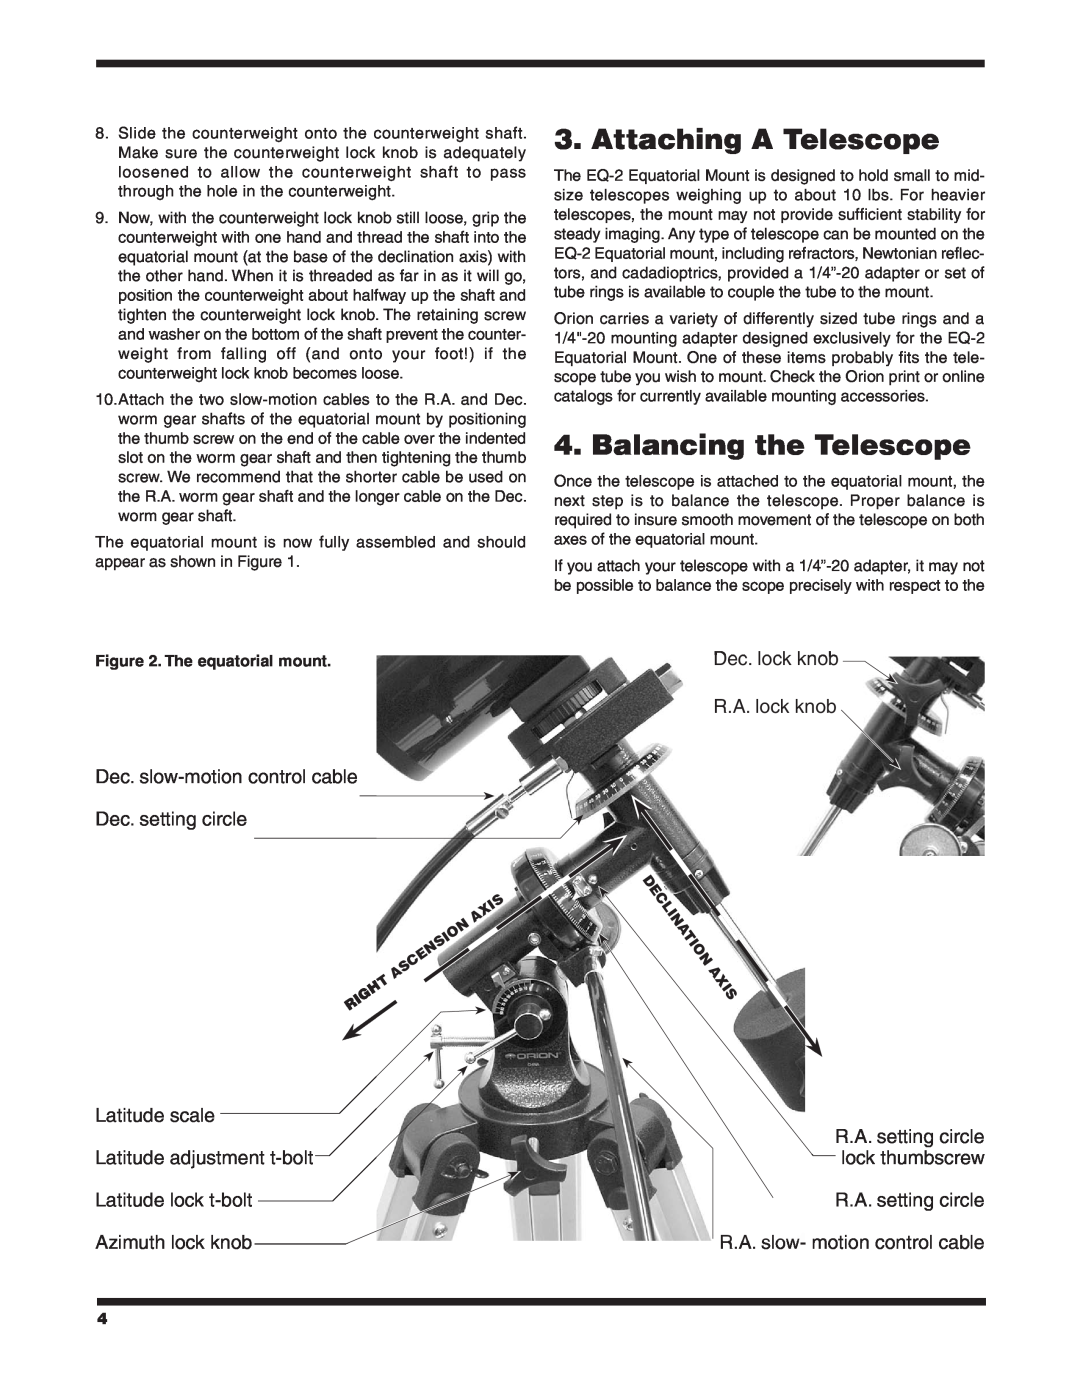 Orion 9828 instruction manual Attaching A Telescope, Balancing the Telescope, e D clination axis, The equatorial mount 